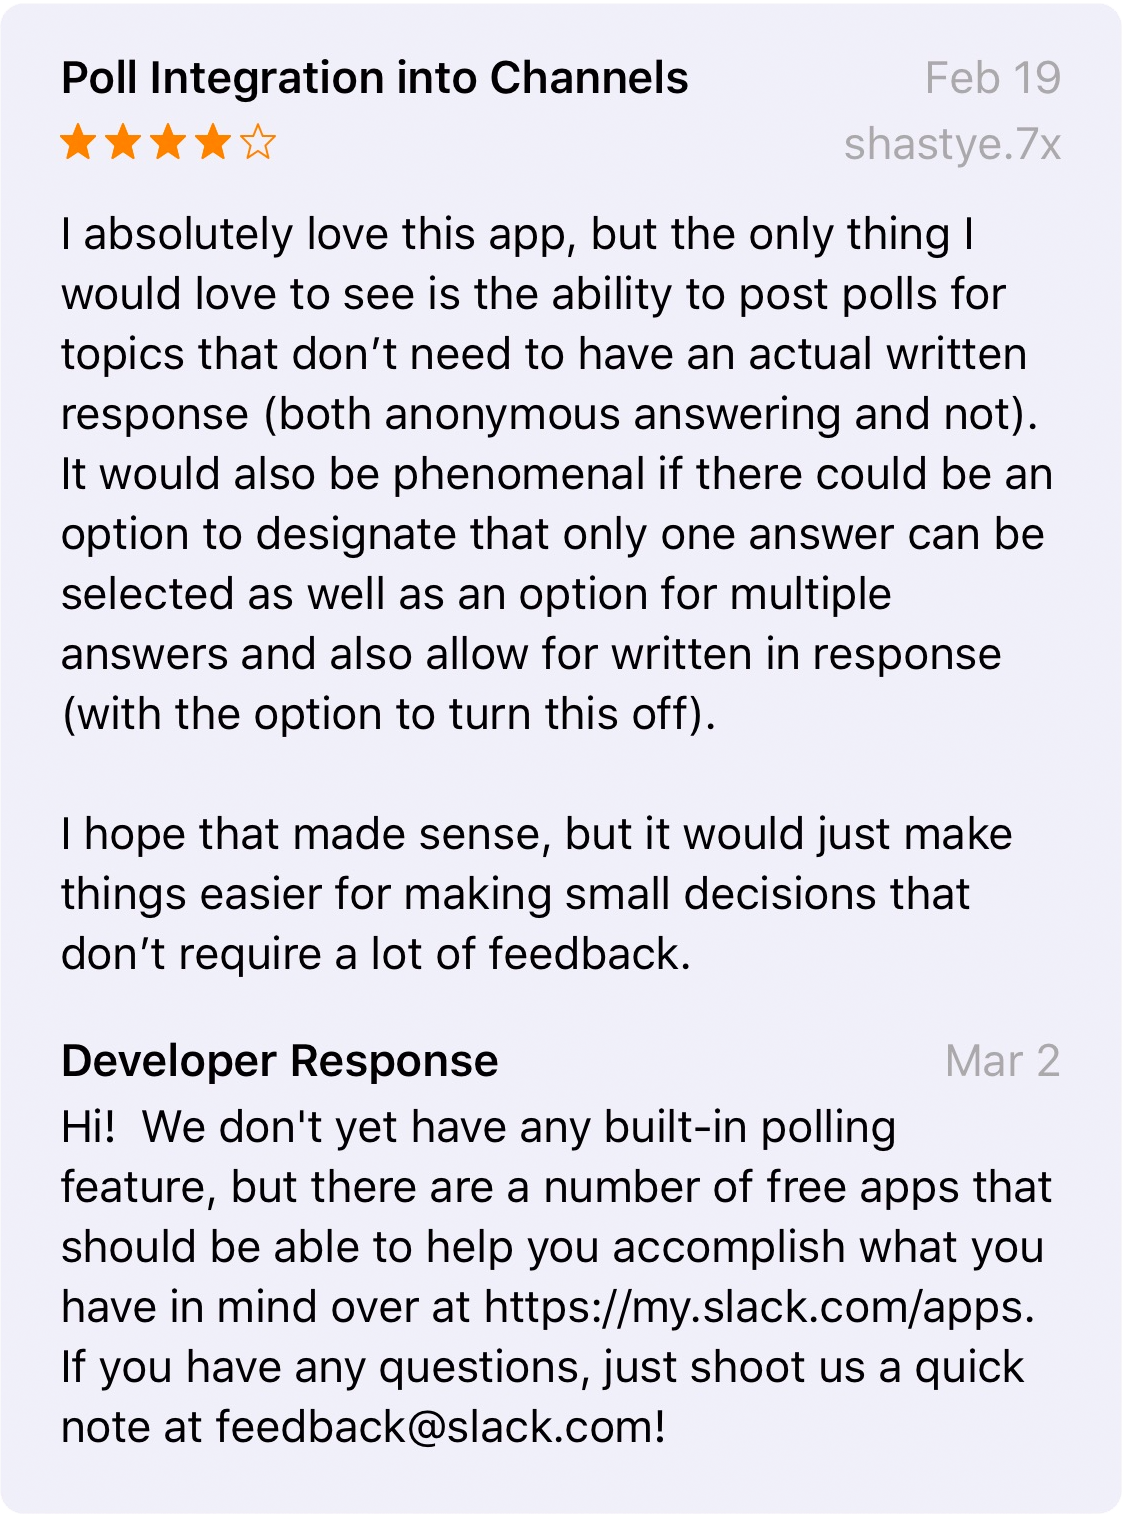 Be honest and upfront when replying to reviews for your apps